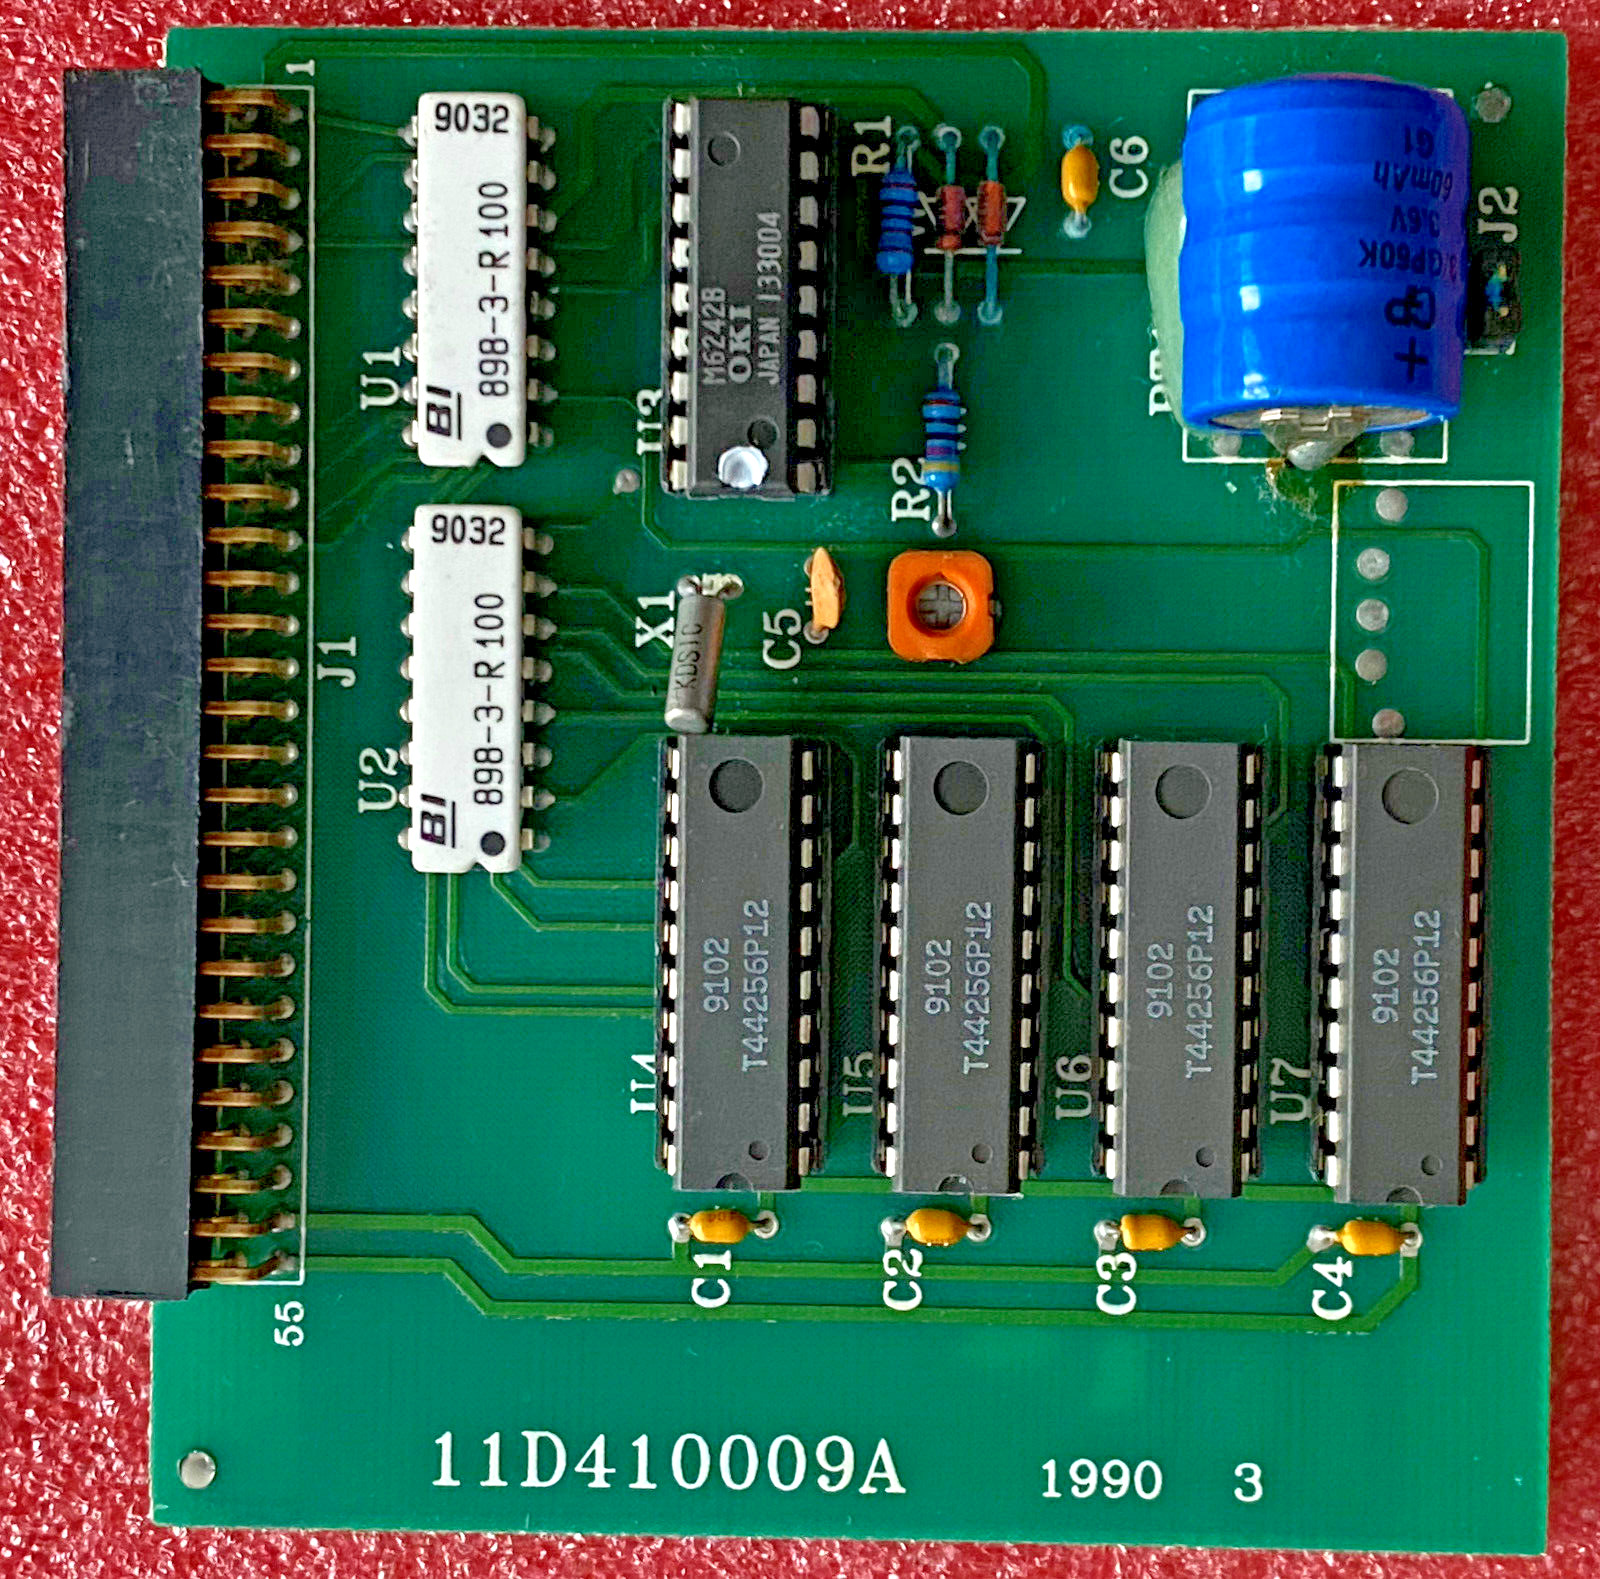 Memory Expansion 512 KB for Amiga 500/A500 Works #08 22